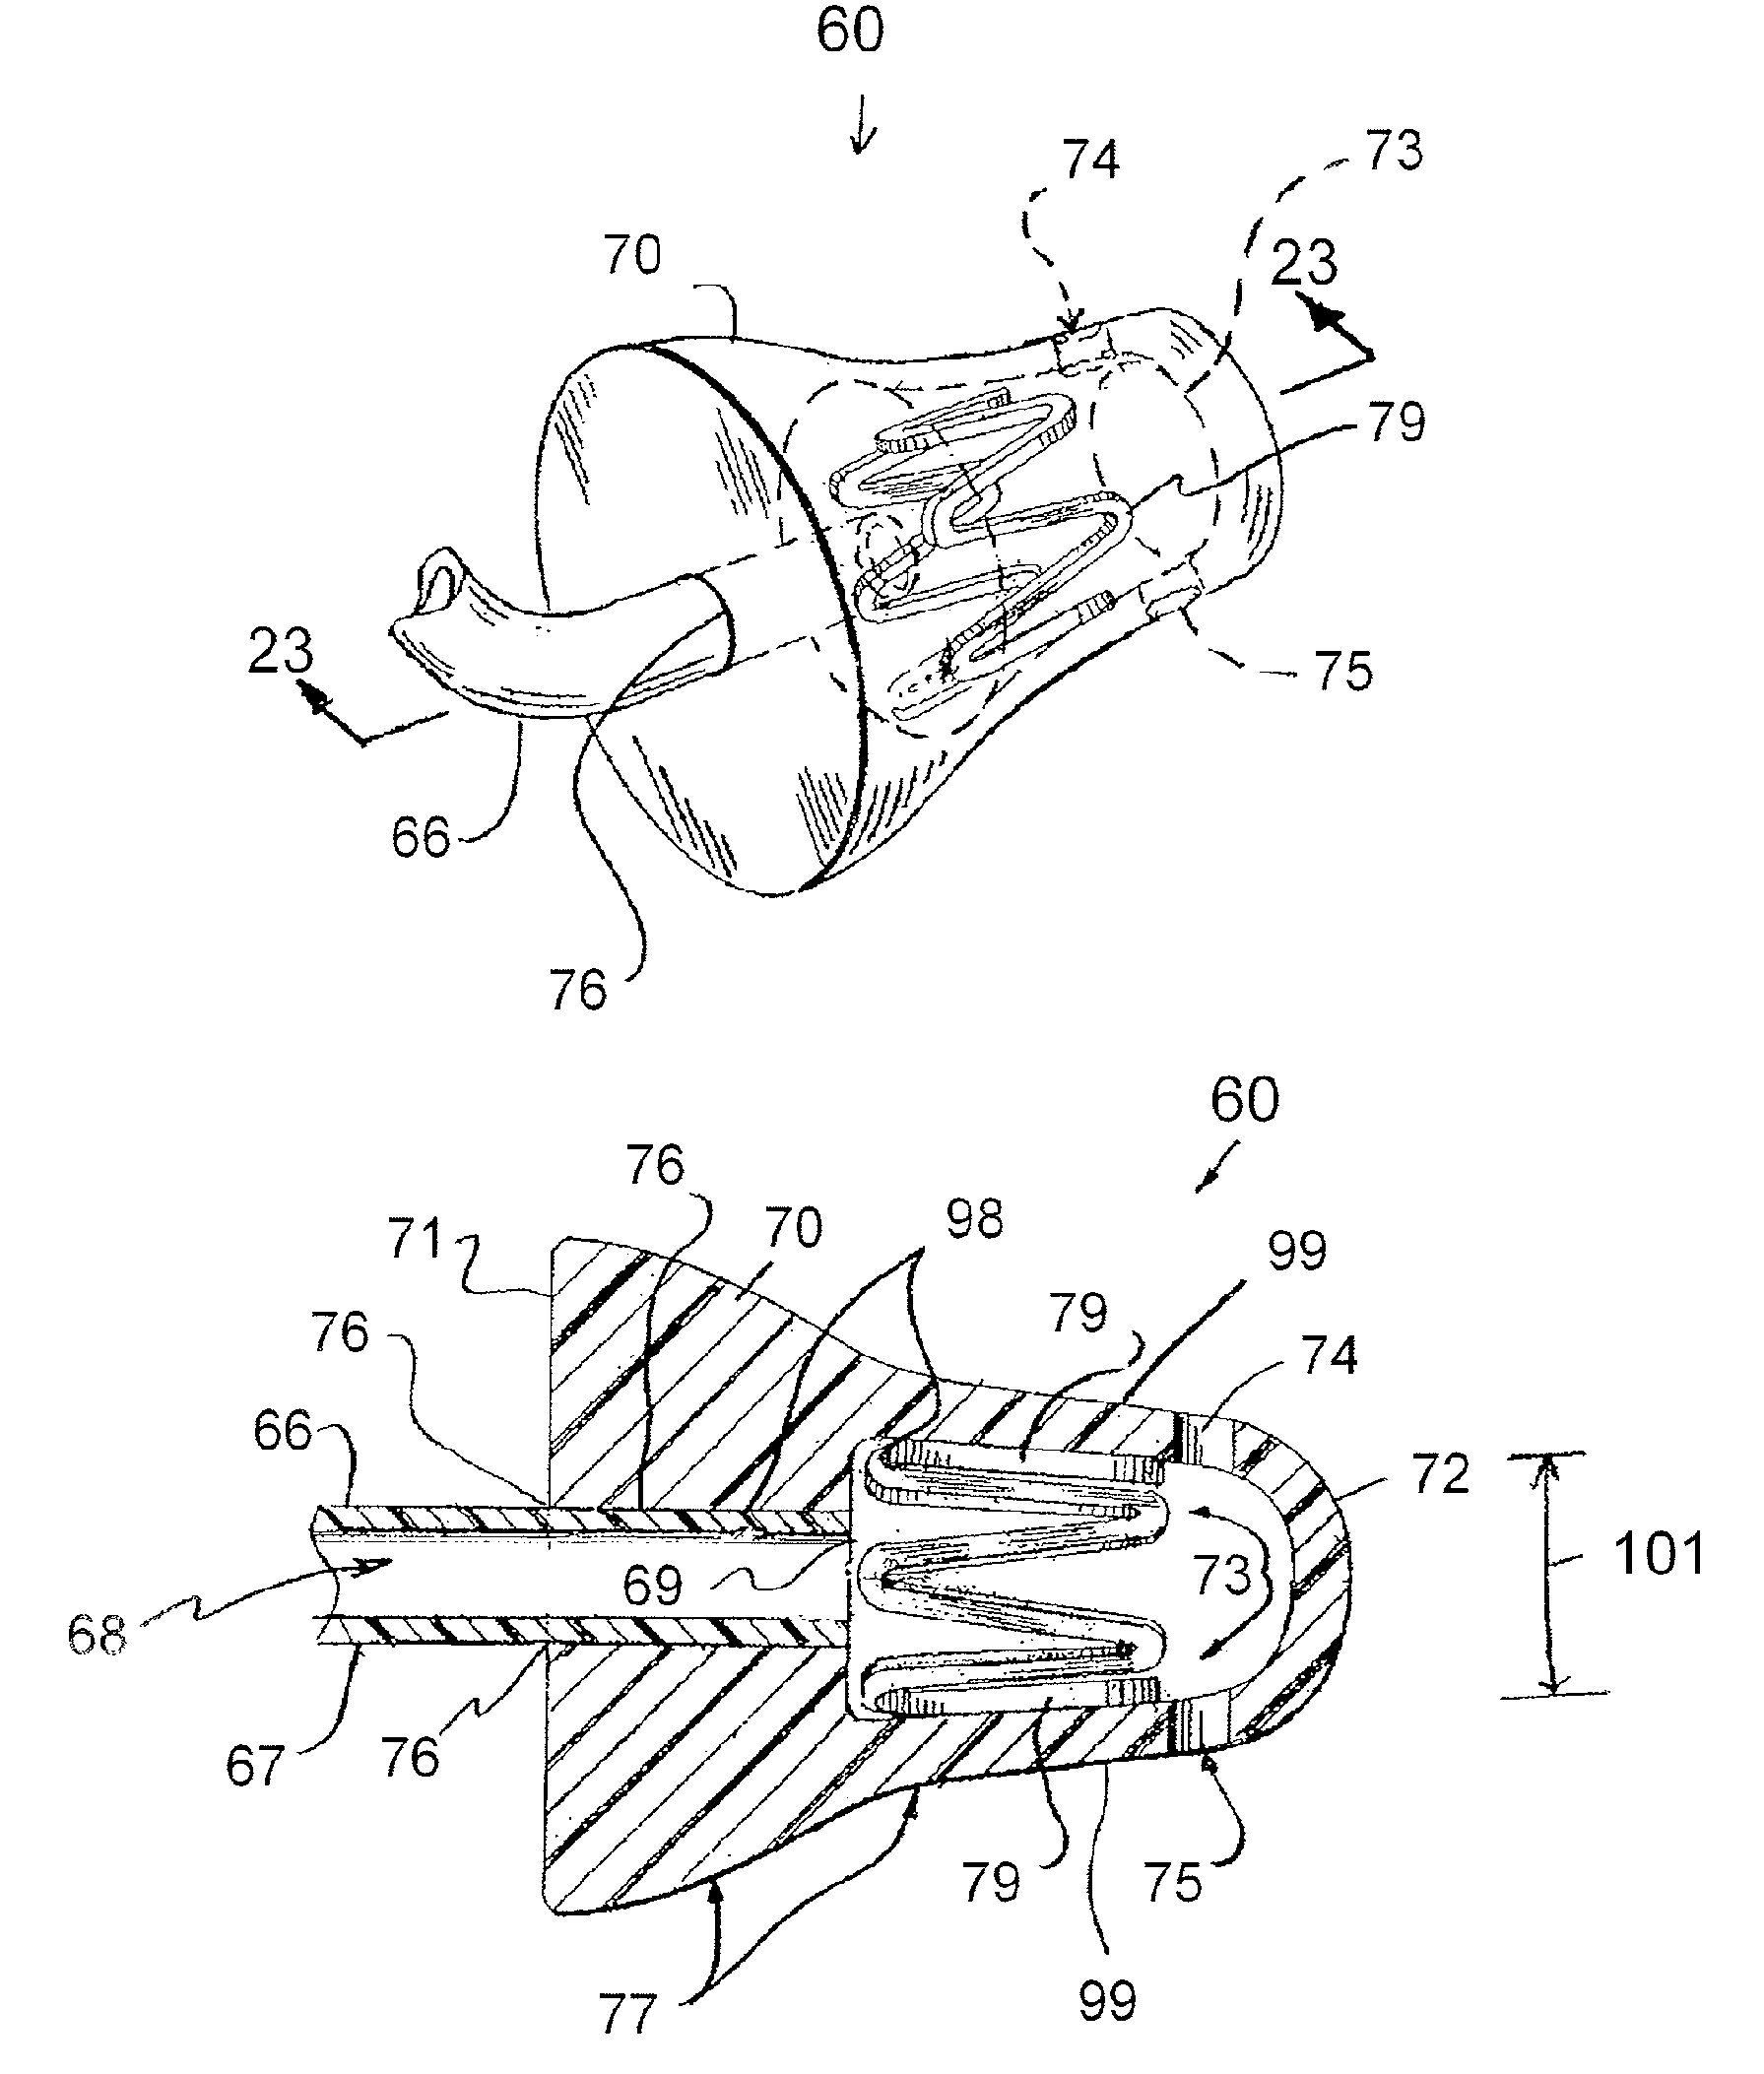 Self forming in-the-ear hearing aid with conical stent